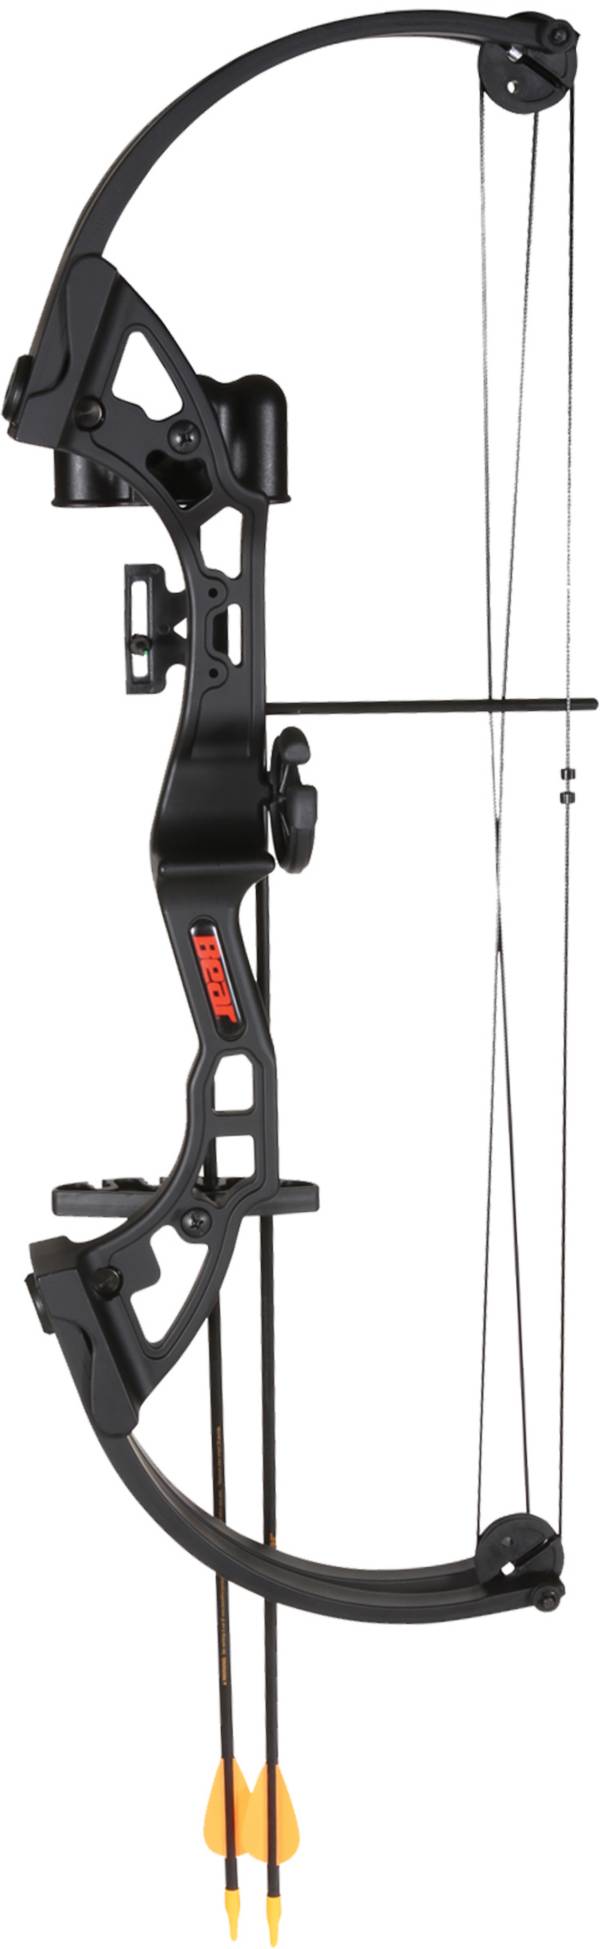 Bear Archery Brave Youth Compound Bow Package product image